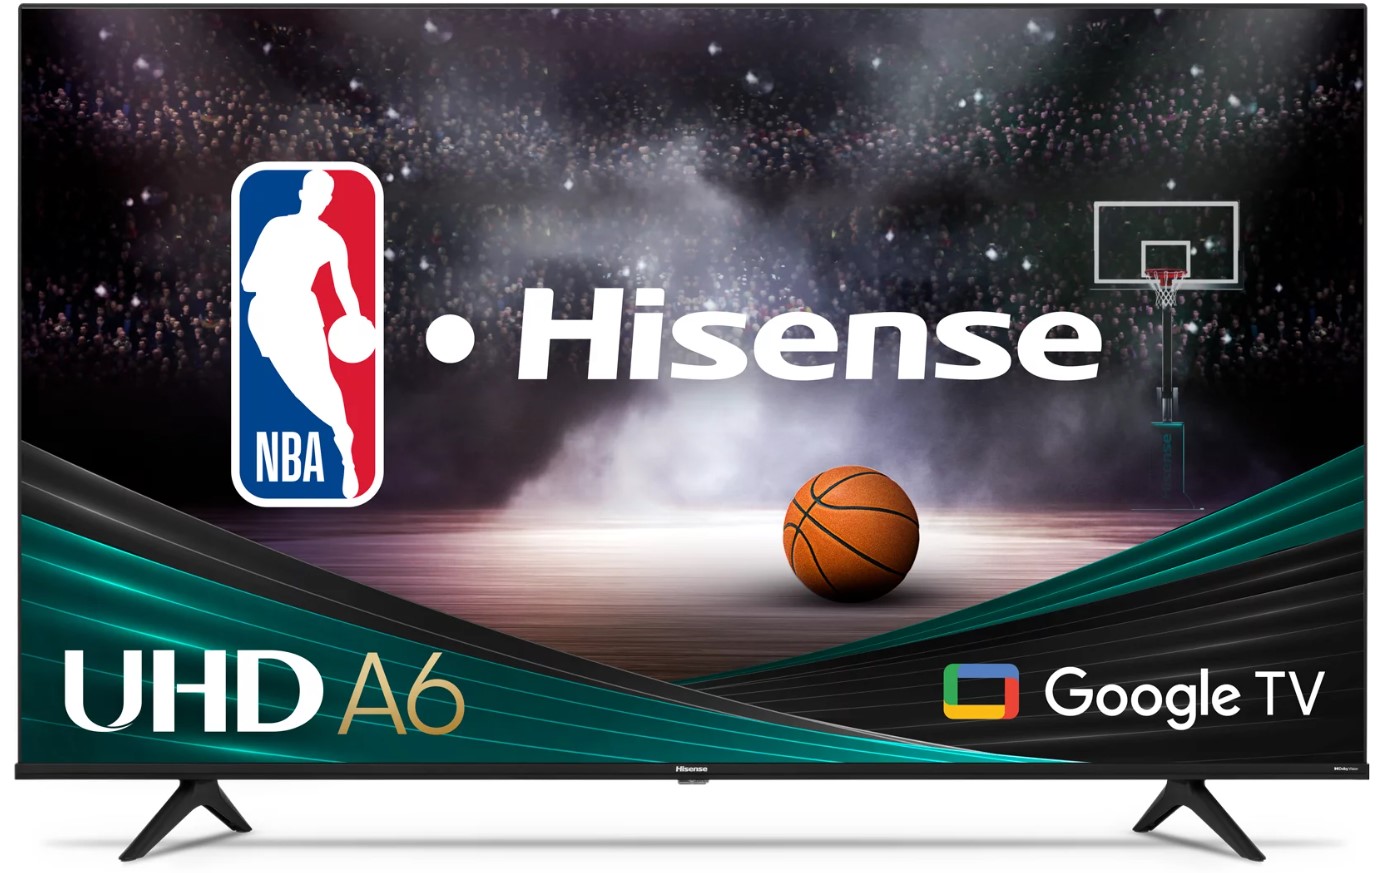 How To Download An App On Hisense TV